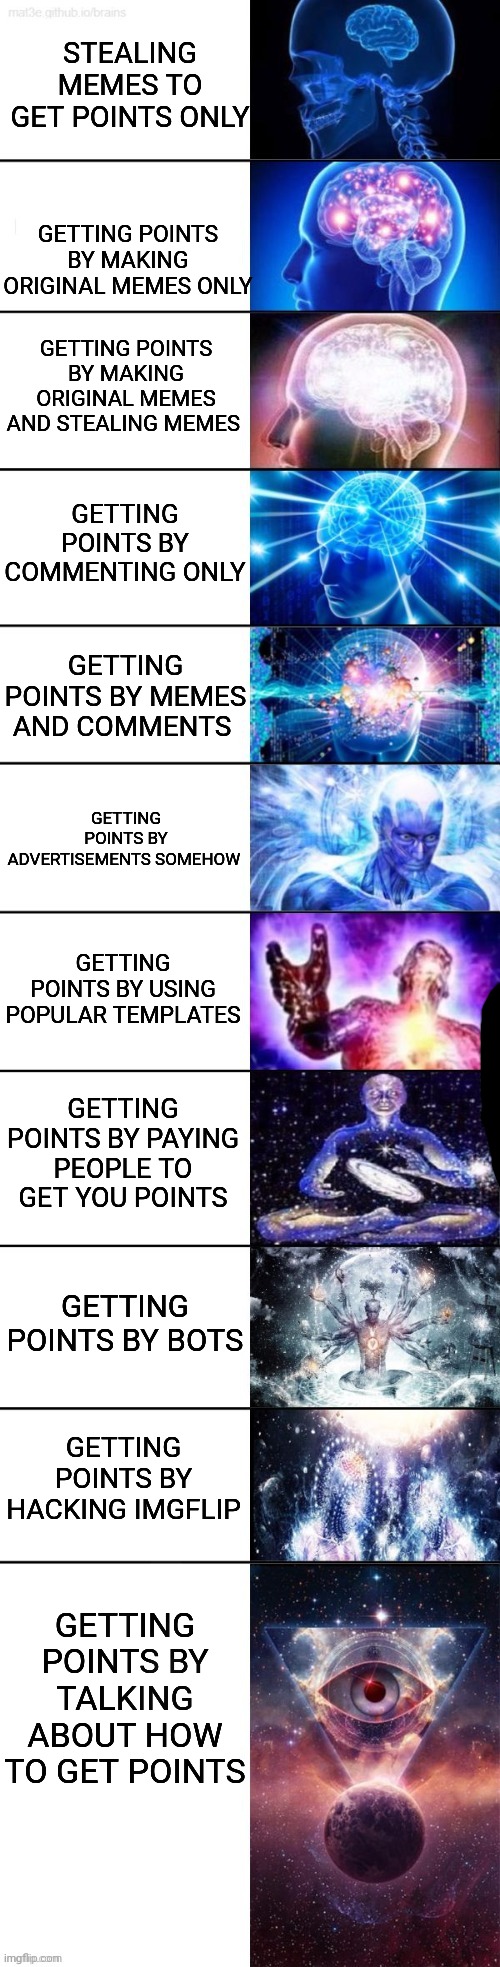 Getting points | STEALING MEMES TO GET POINTS ONLY; GETTING POINTS BY MAKING ORIGINAL MEMES ONLY; GETTING POINTS BY MAKING ORIGINAL MEMES AND STEALING MEMES; GETTING POINTS BY COMMENTING ONLY; GETTING POINTS BY MEMES AND COMMENTS; GETTING POINTS BY ADVERTISEMENTS SOMEHOW; GETTING POINTS BY USING POPULAR TEMPLATES; GETTING POINTS BY PAYING PEOPLE TO GET YOU POINTS; GETTING POINTS BY BOTS; GETTING POINTS BY HACKING IMGFLIP; GETTING POINTS BY TALKING ABOUT HOW TO GET POINTS | image tagged in expanded expanding brain but with pre set-up textboxes | made w/ Imgflip meme maker